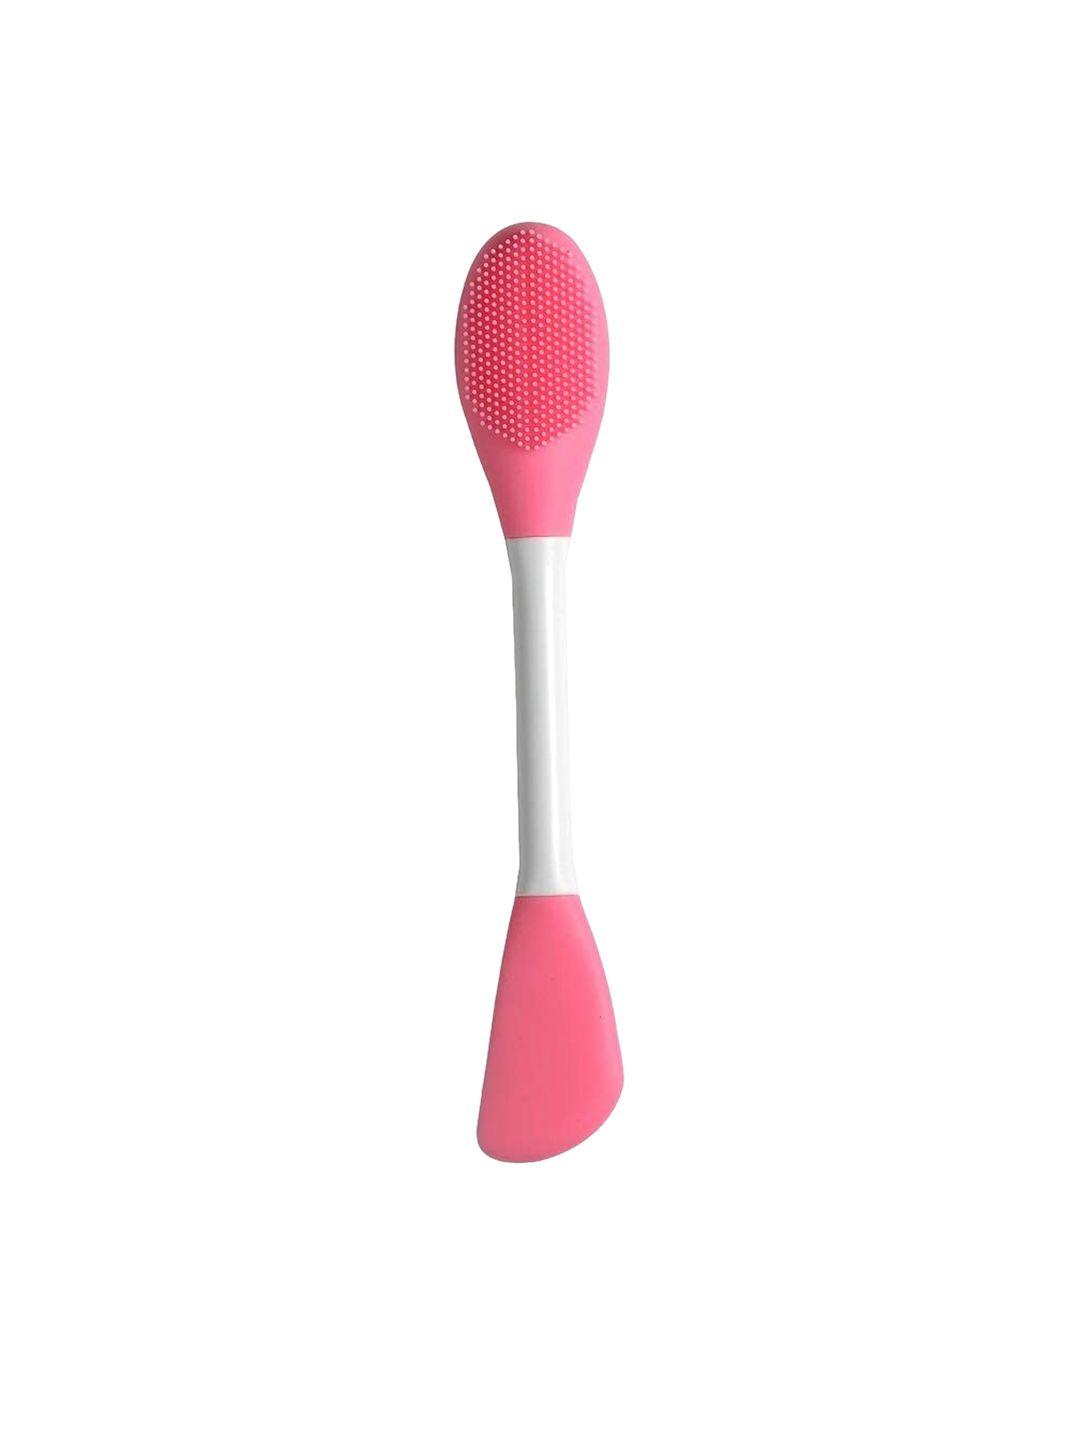 getmecraft double sided face mask applicator brush - pink